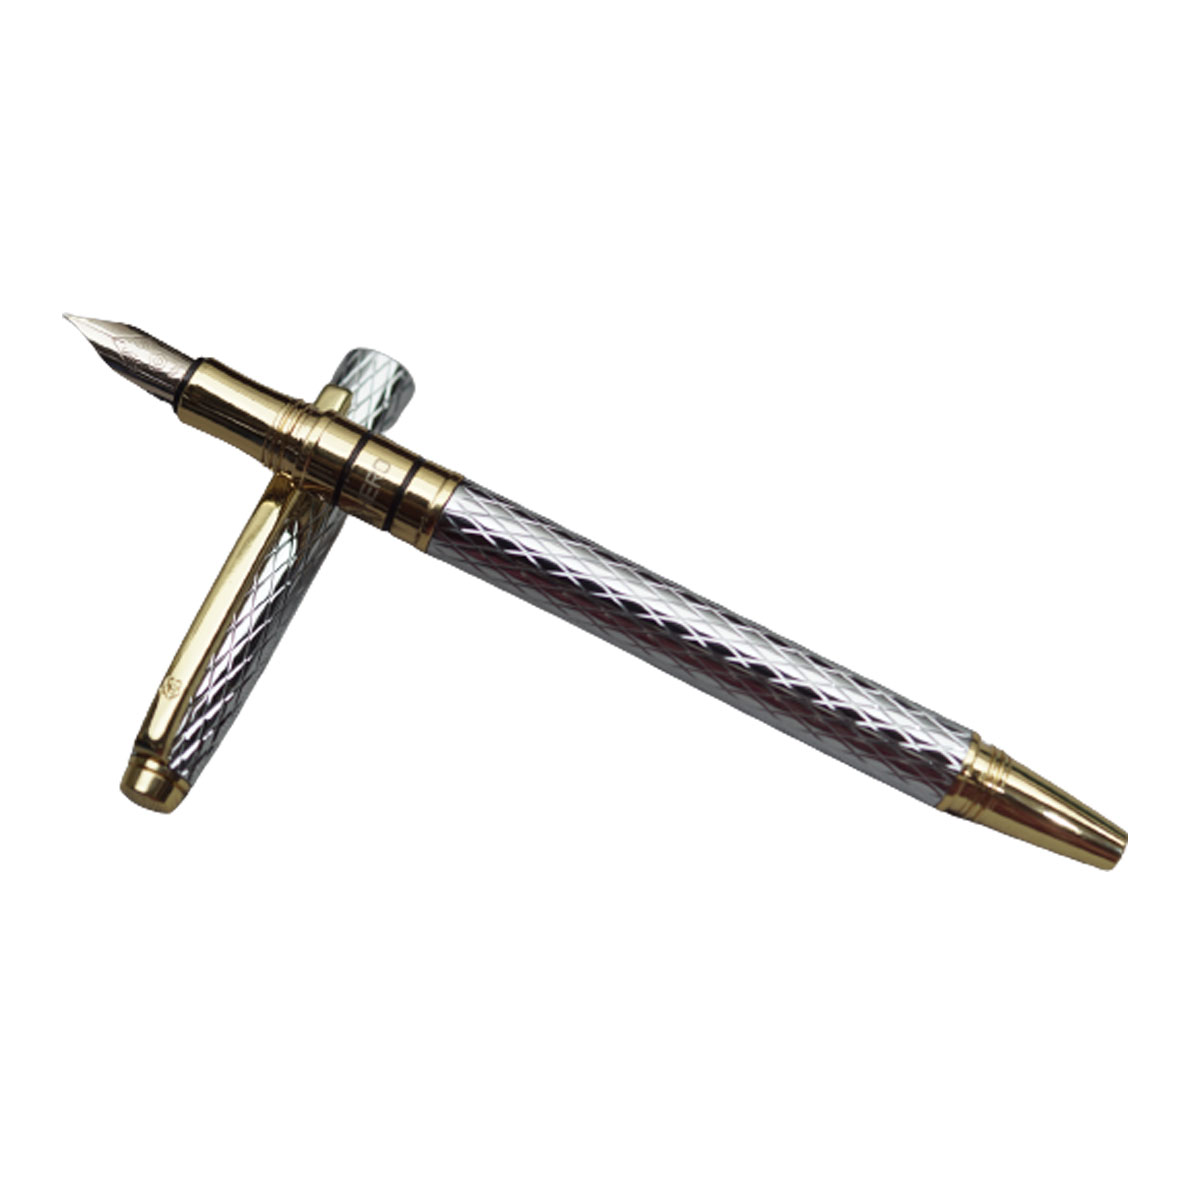 Hero 703- 10K - Gold Nib Fine Tipped Slim converter type Fountain Pen Silver Color Body and Cap with Gold Trims SKU 20239